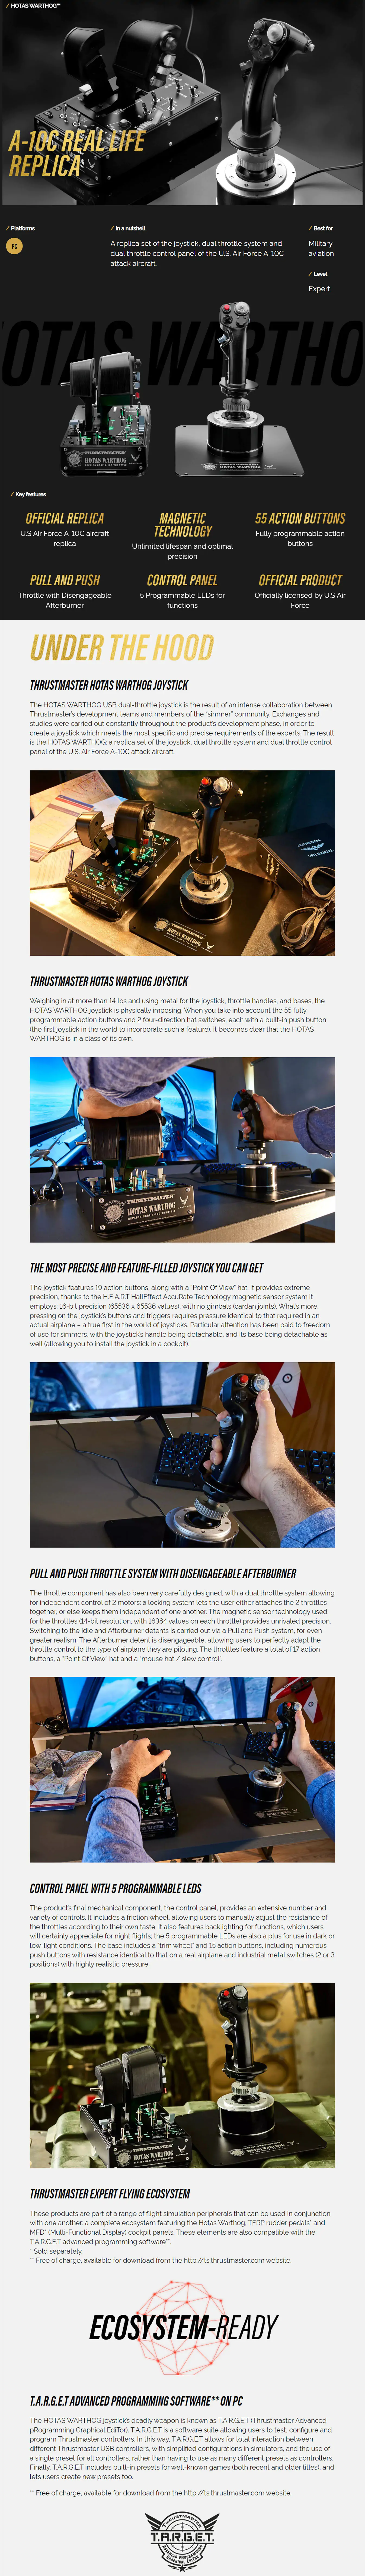 A large marketing image providing additional information about the product Thrustmaster HOTAS Warthog - Joystick & Throttle for PC - Additional alt info not provided